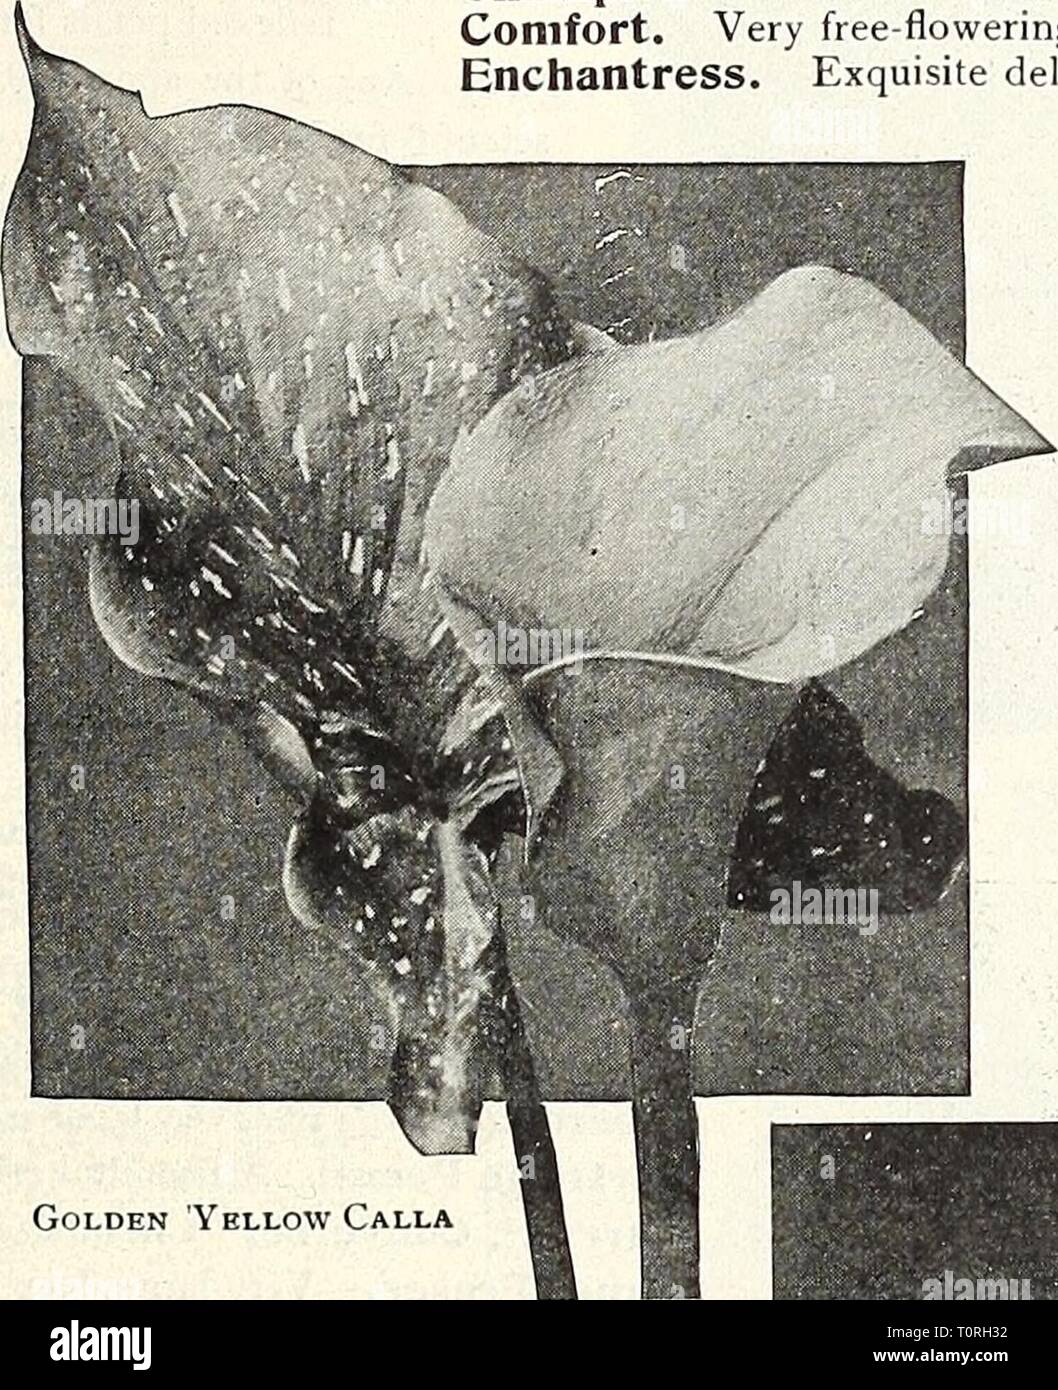 Dreer's garden book 1916 (1916) Dreer's garden book 1916  dreersgardenbook1916henr Year: 1916  Select Carnation Golden Yellow Calla CALLAS (Richardia) Tha varieties offered below succeed best when treated in the same manner as Gladiolus, Tuberoses and other summer- flowering bulbs. They should be planted in the open border in a dormant condition when danger from frost is over in spring, and will then flower during the summer months. In the autumn dig and store through the winter as youwould potatoes. Golden Yellow {Richardia Elliottiana). This is the best of the Yellow Callas, its flowers bein Stock Photo